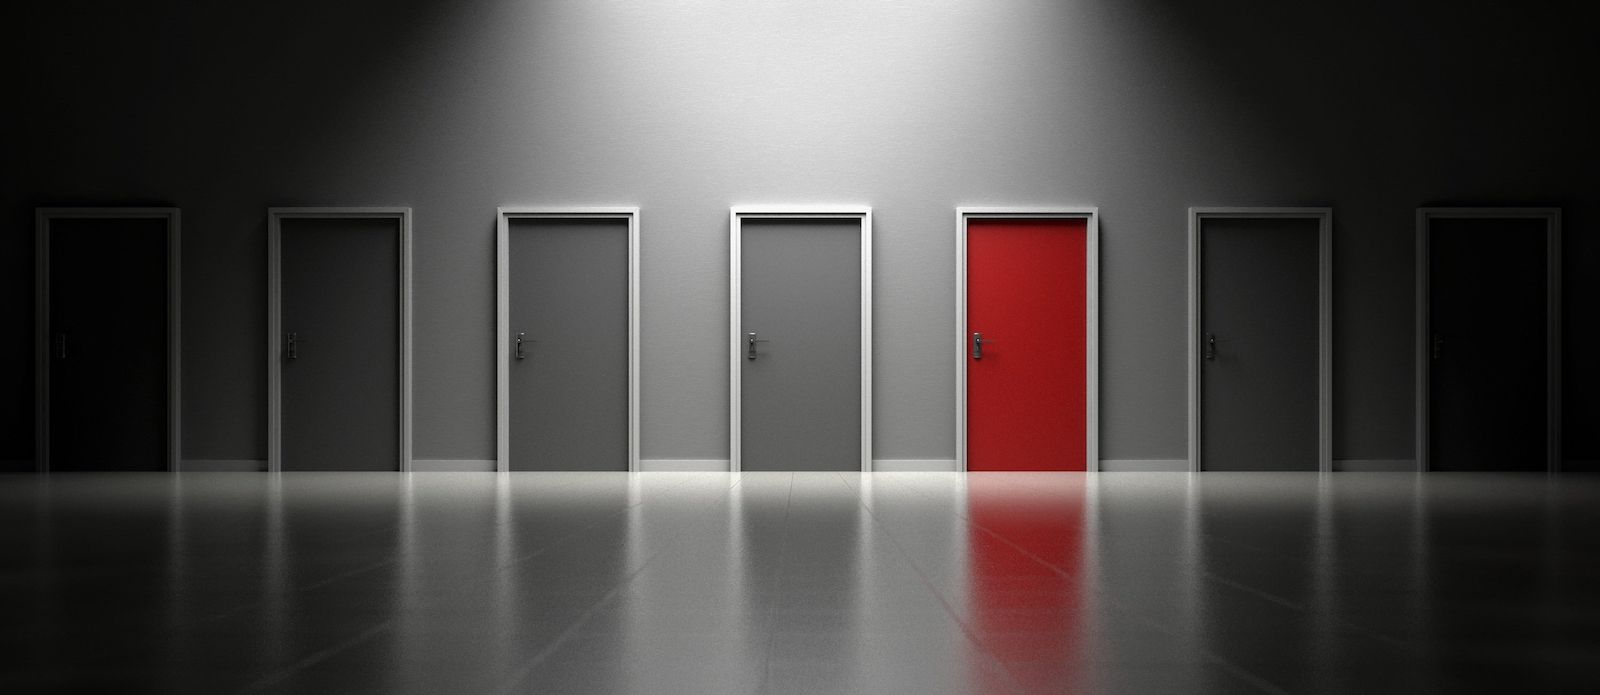 How to Choose an eLearning Design Agency California - Picture of Doors